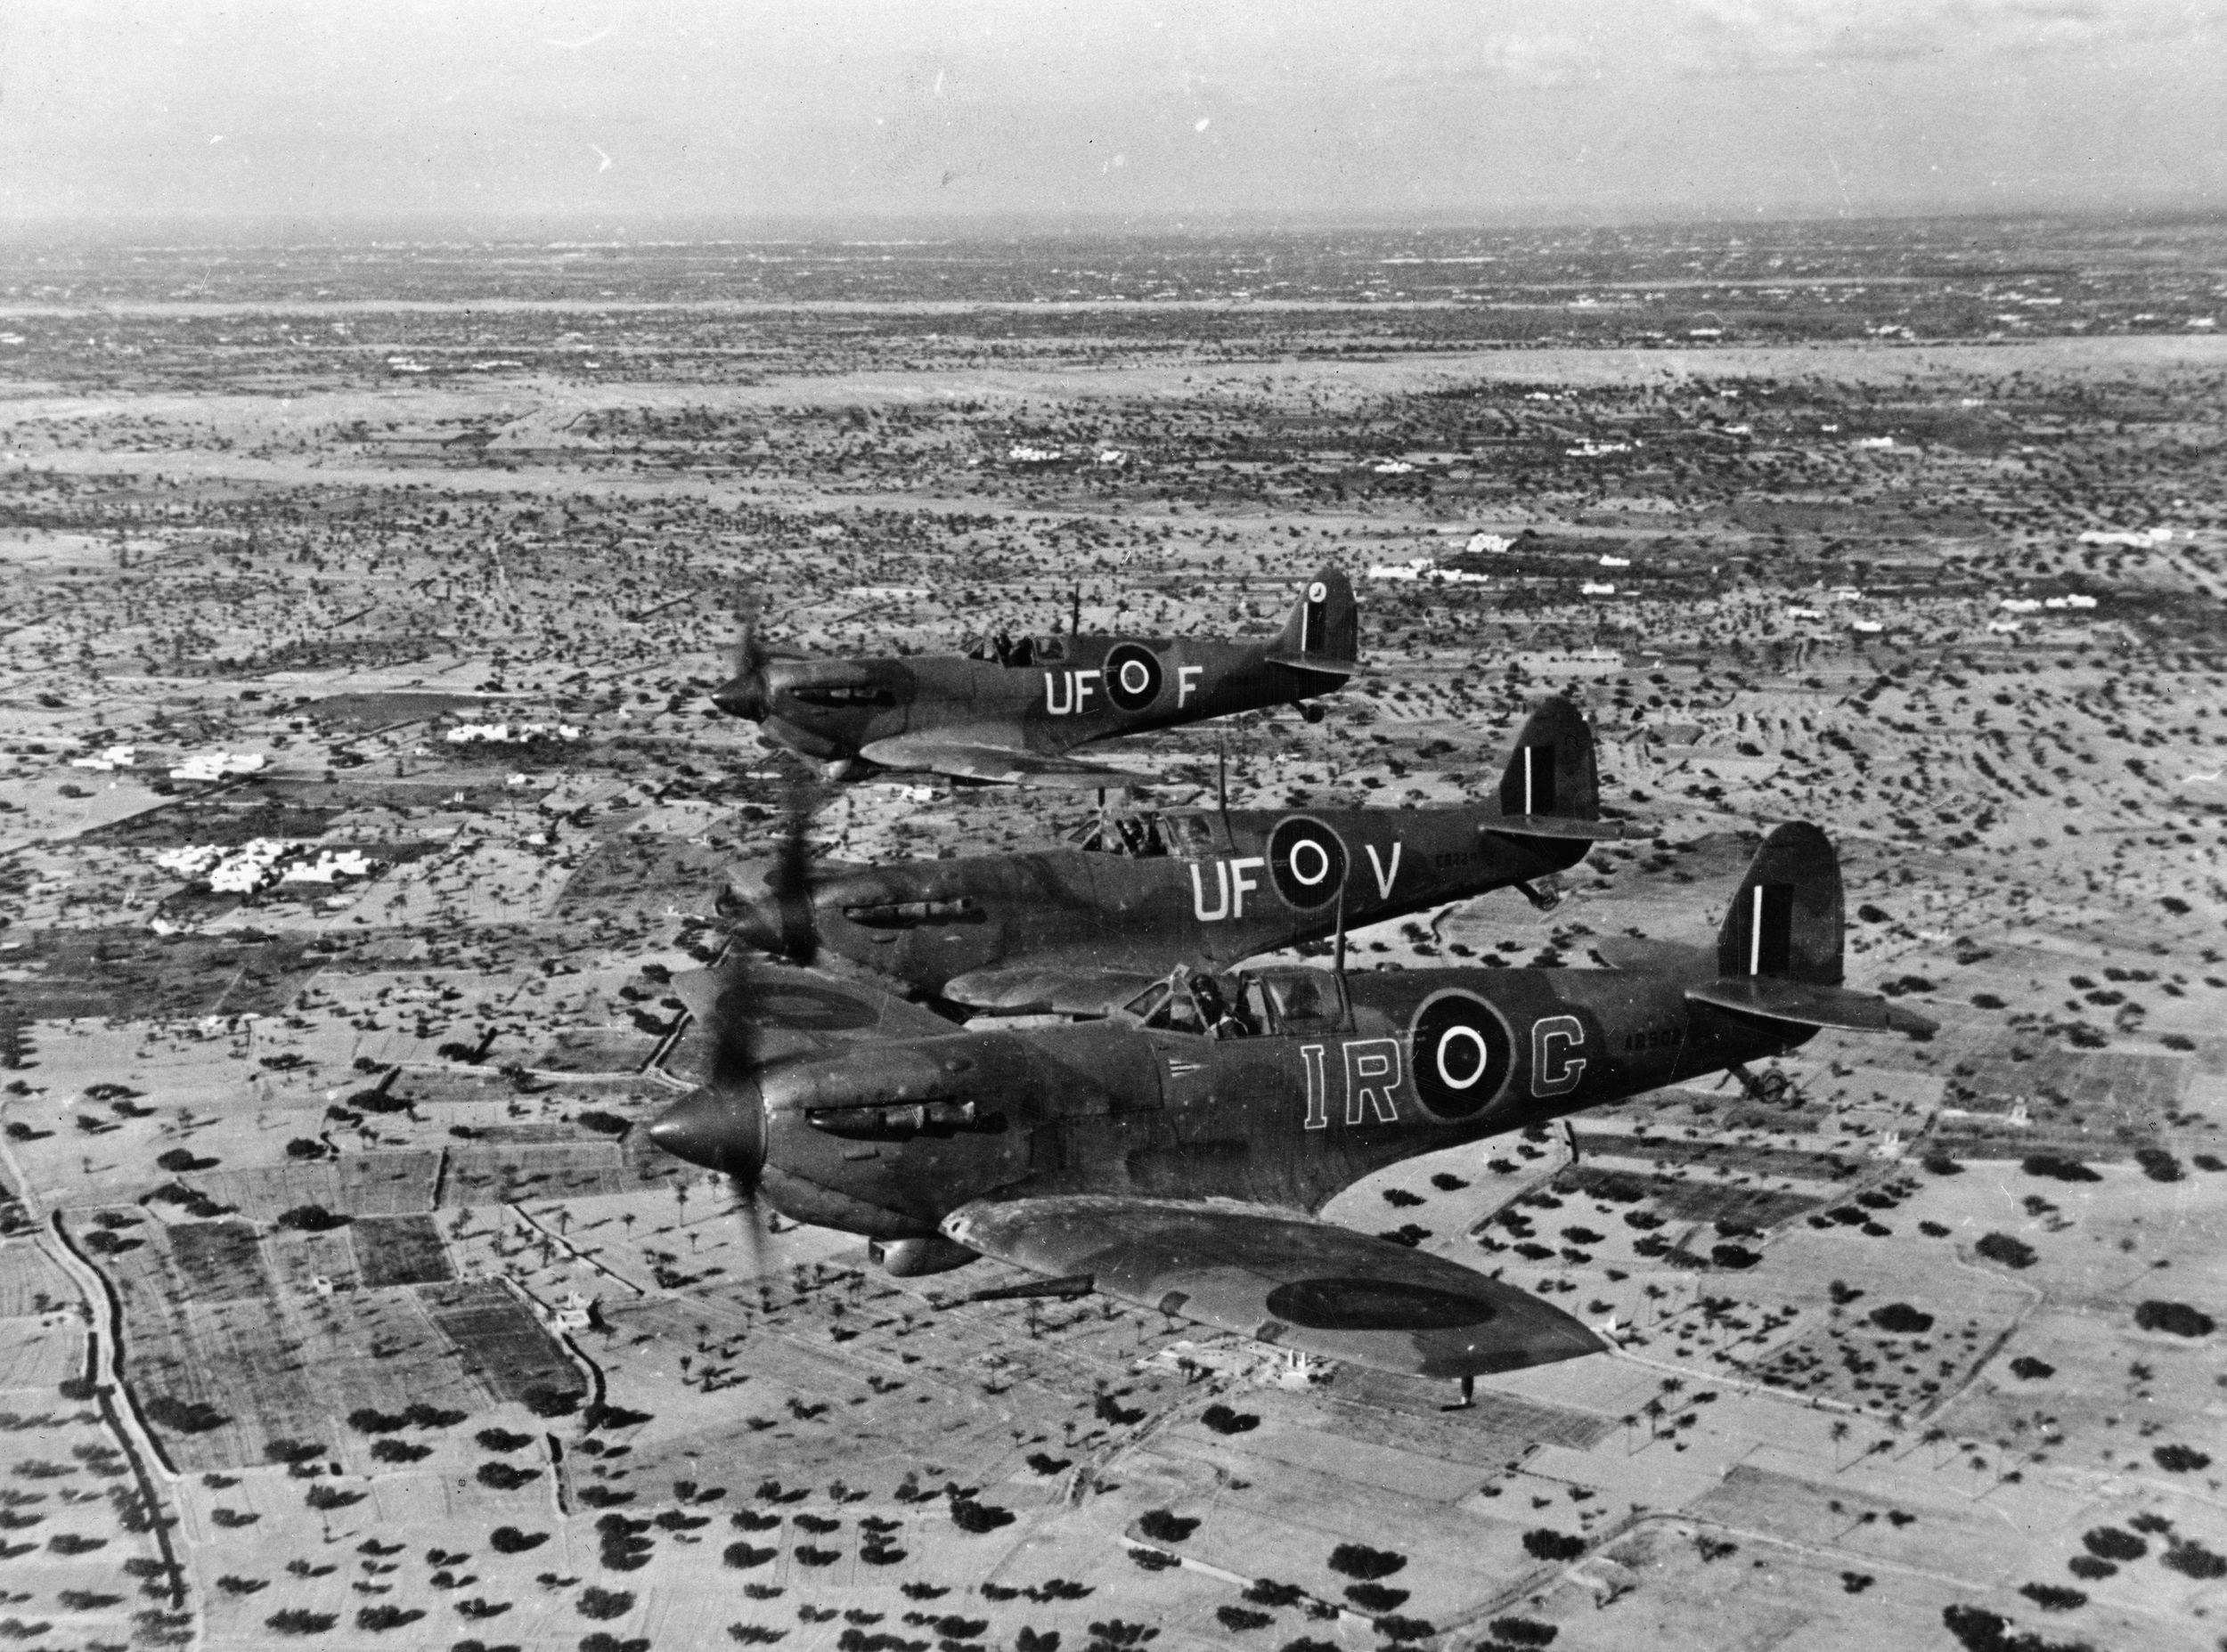 Off the coast of De Djerba island, a formation of RAF Spitfire fighters patrols near the Mareth Line in North Africa.  The Spitfire served in all theaters of World War II, and a naval version, the Seafire, was also developed. (Library of Congress)